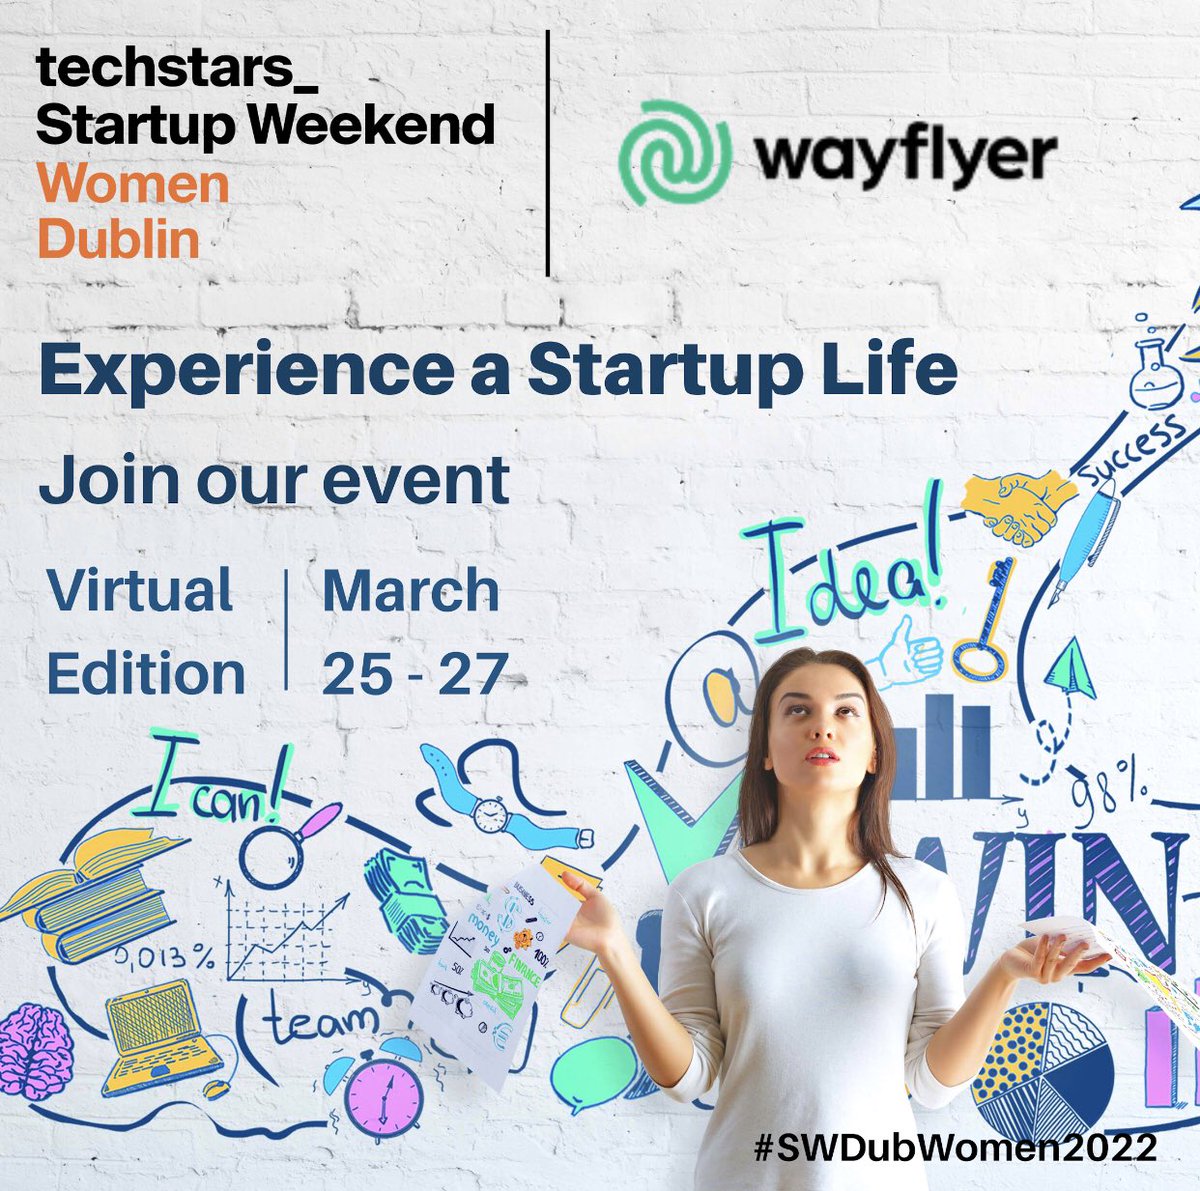 @YourYNetworkHQ @dscanlon @socentie @LEODCWomen @Tech4GoodDublin @SAP @SheUpsOrg @siliconrepublic @StartupWeekend @DublinGazette @SocialimpactIRE Don’t miss out on this incredible opportunity to help realise your #startup! 🙌🏾
 
@Techstars @swdubwomen brings together an incredible & inspiring #techecosystem network to help you!🥳

Register👇🏾
event.techstars.com/event/NSF5eTvy…

#SWDubWomen2022 #womeninbusiness #womenempowement #sgds